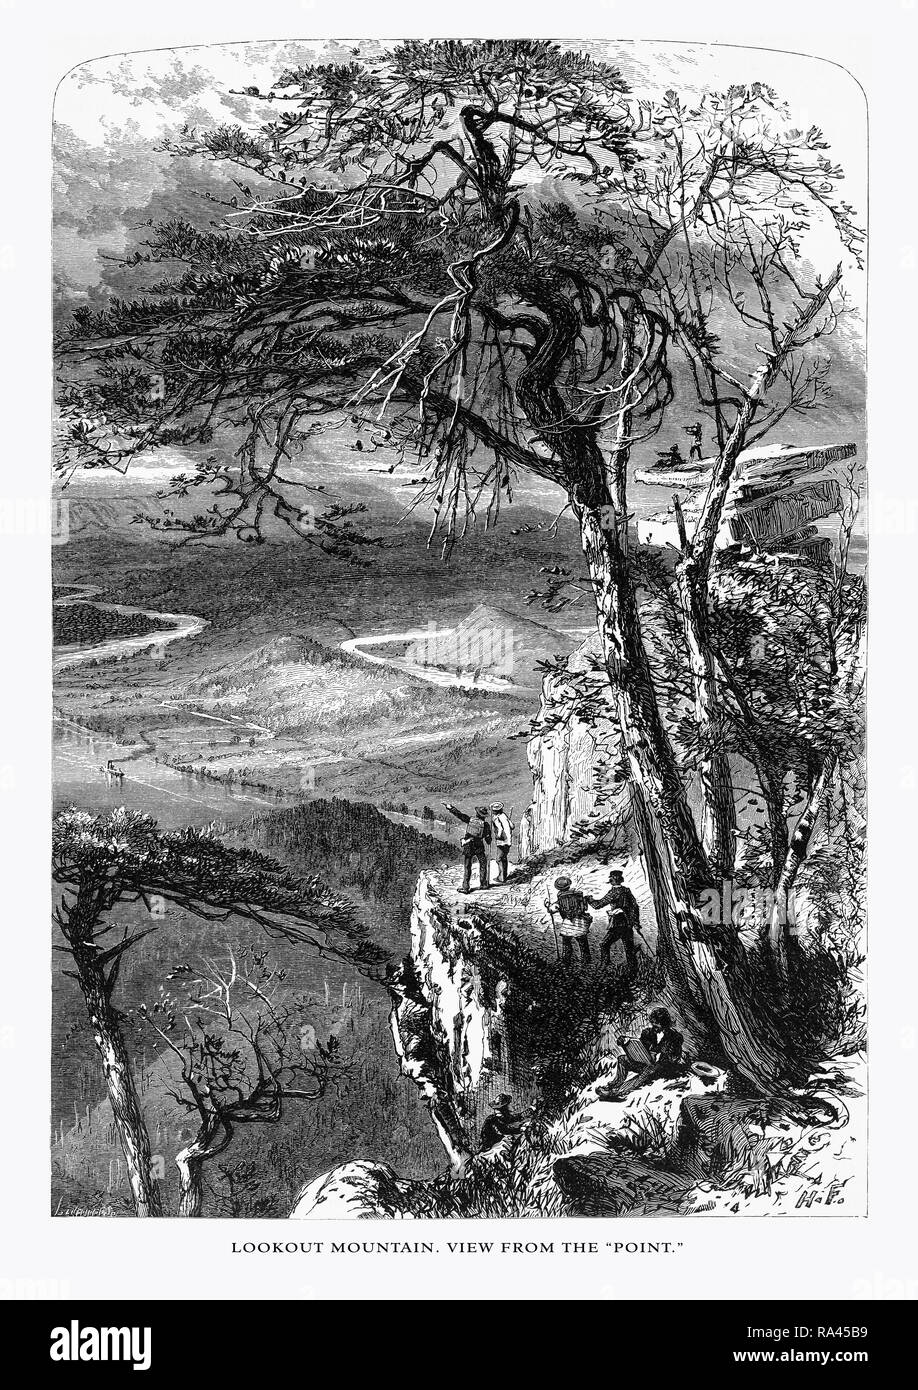 Lookout Mountain, View from the “Point,” Tennessee, United States, American Victorian Engraving, 1872 Stock Photo